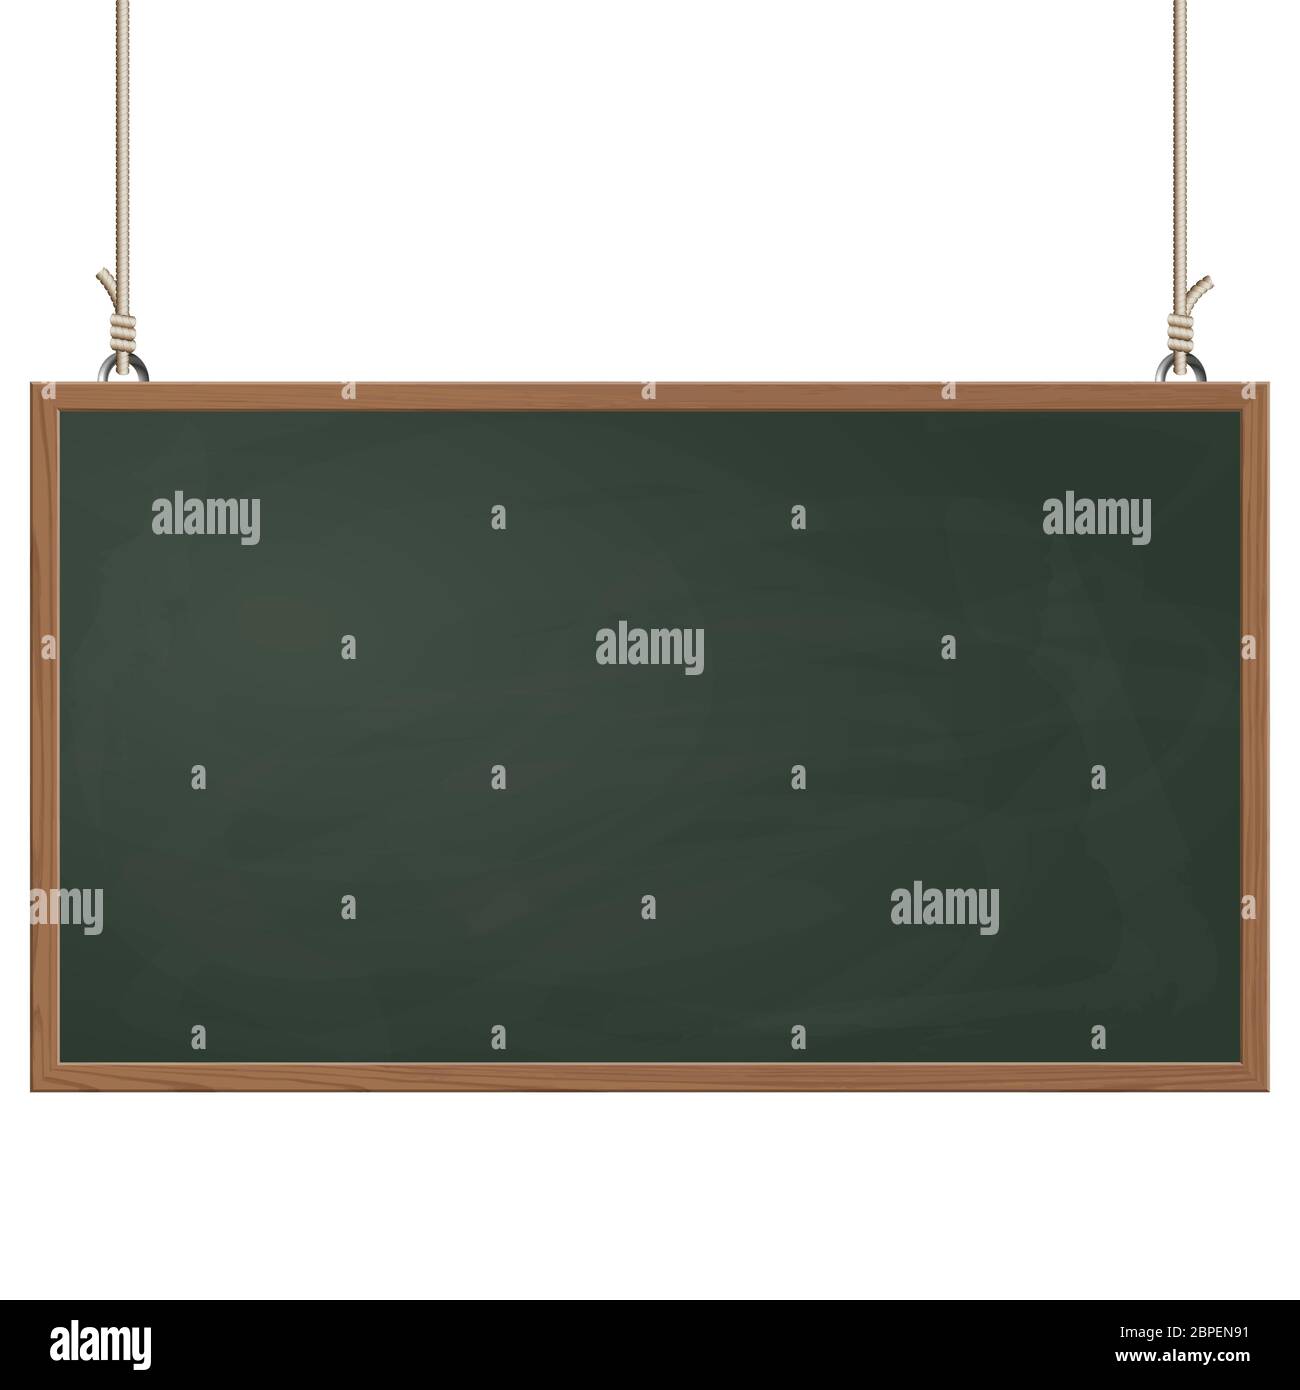 blank black board with wooden frame hanging on ropes Stock Photo